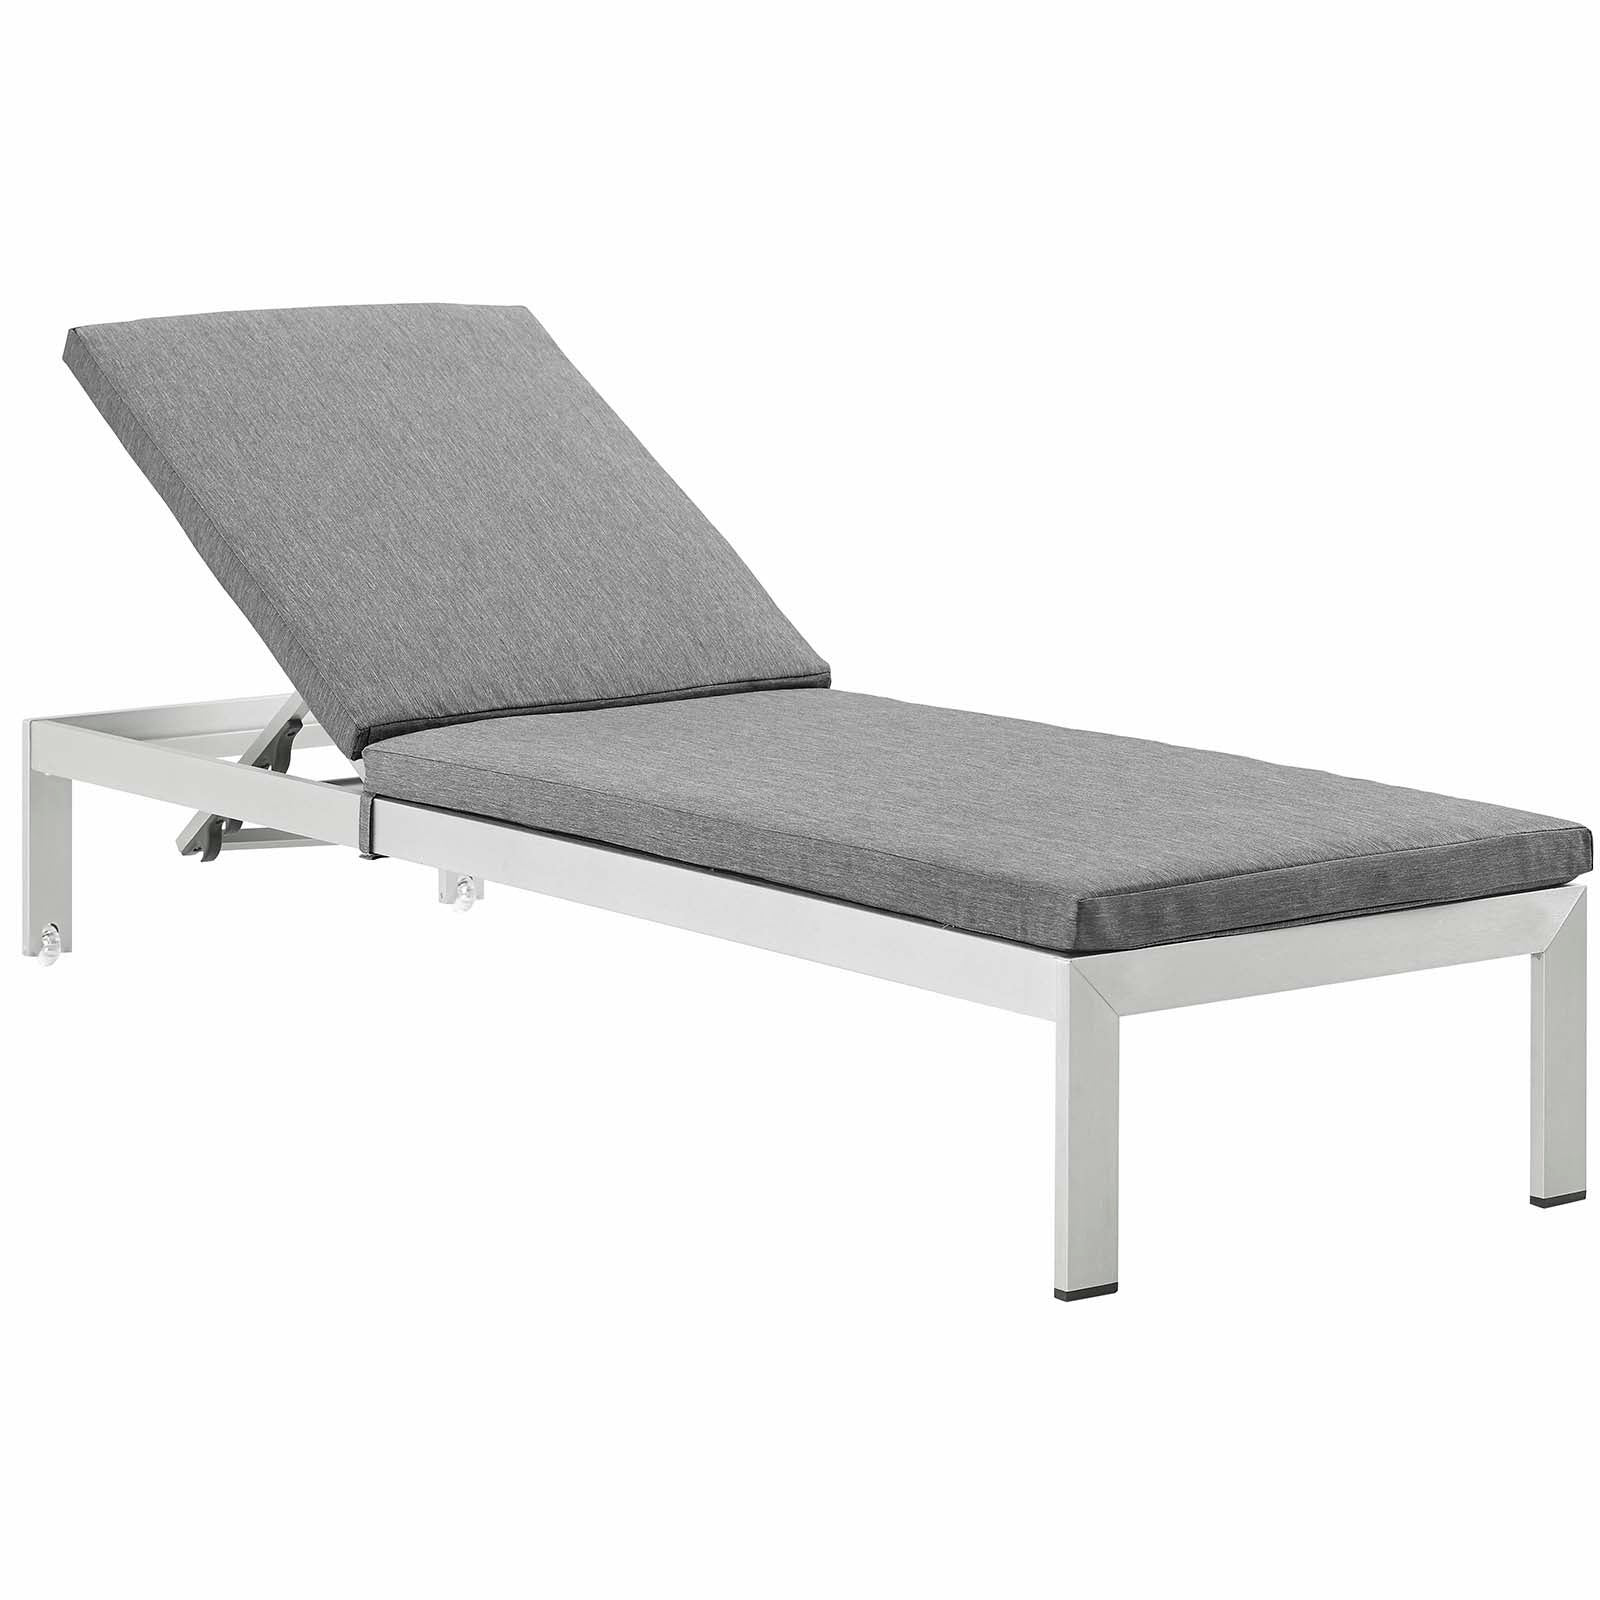 Shore Chaise with Cushions Outdoor Patio Aluminum Set of 4 - East Shore Modern Home Furnishings